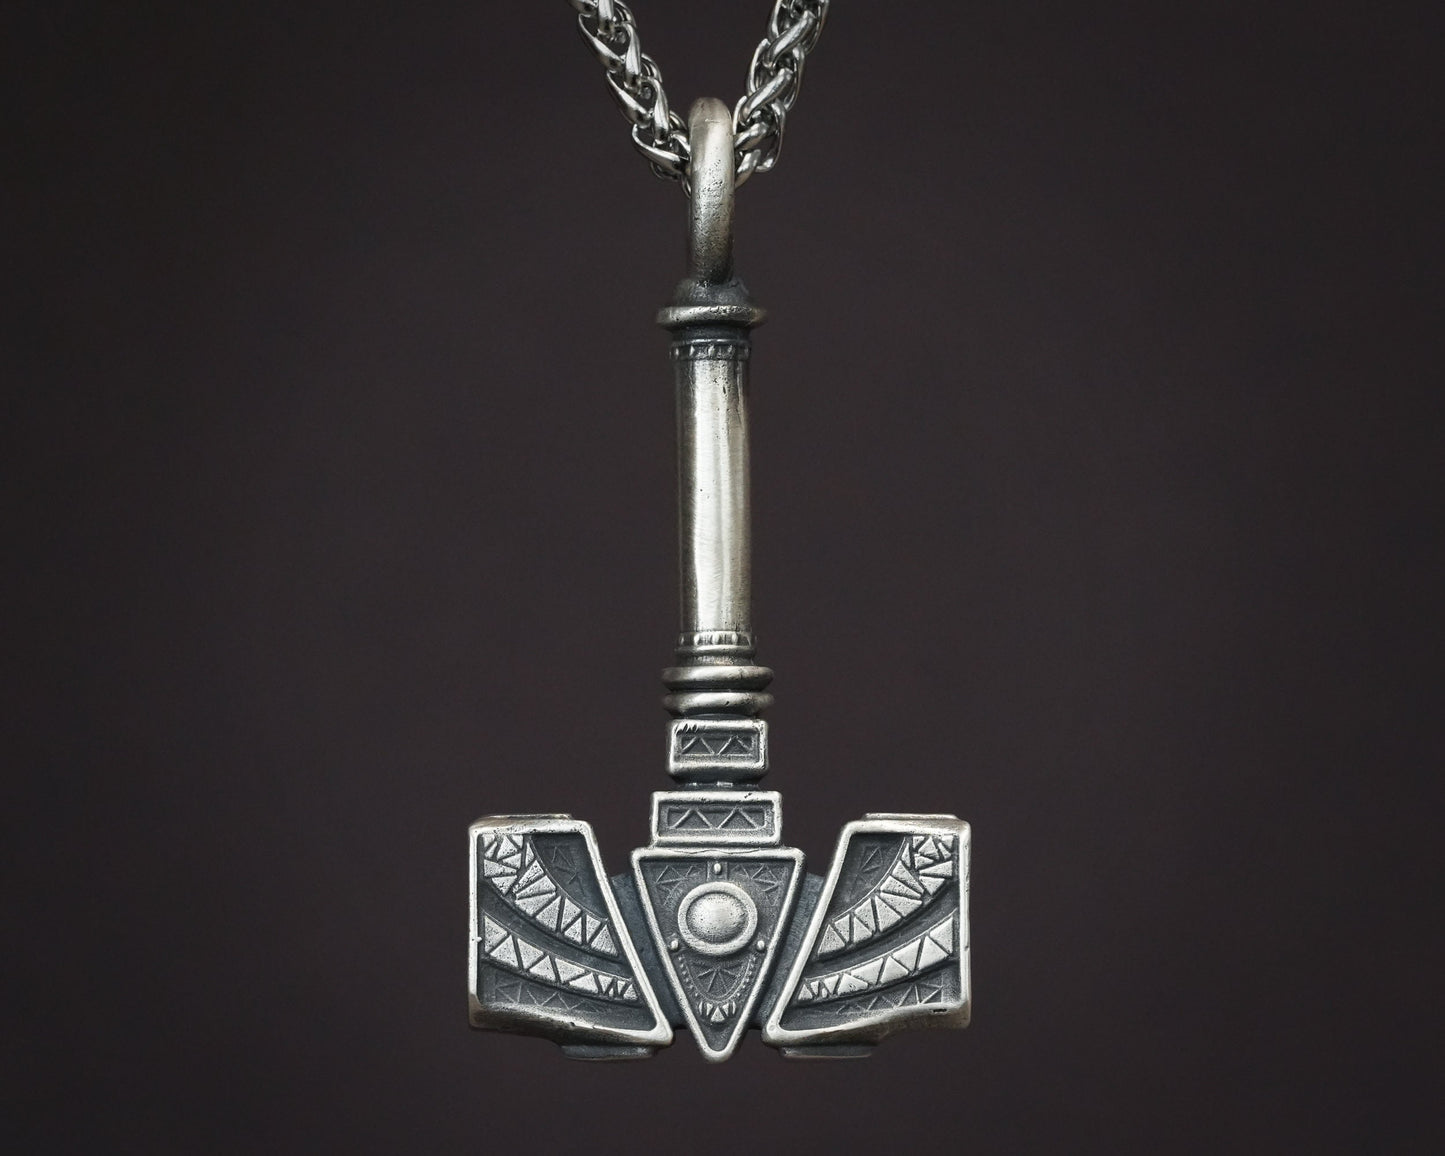 Handmade Viking Thors Hammer Necklace For Men and Women With Strong 22 Inches Long Chain, Brass / 925 Sterling Silver Casting - Baldur Jewelry